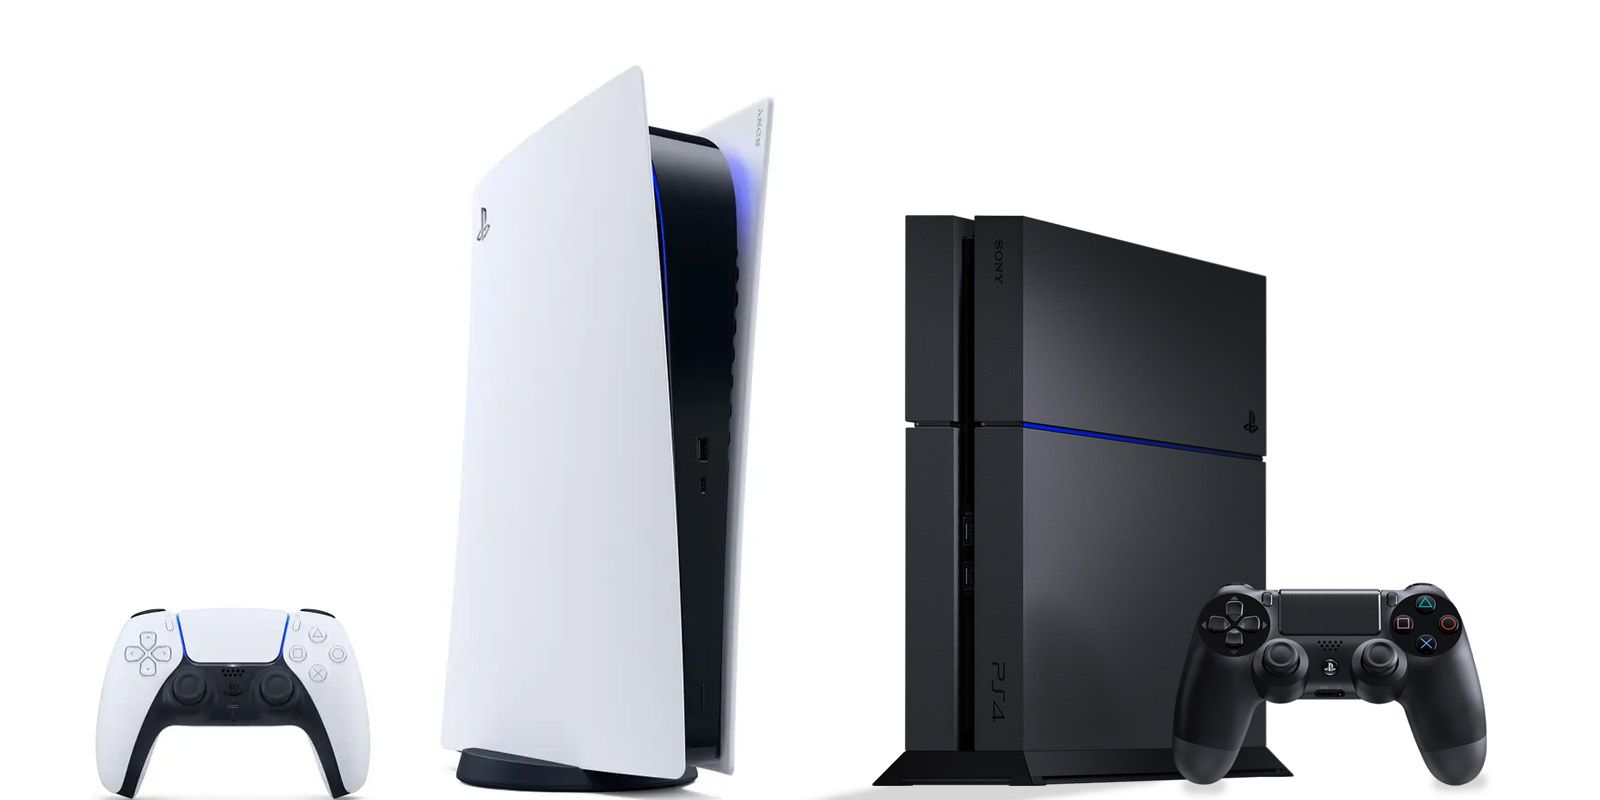 what will be the price of ps4 after ps5